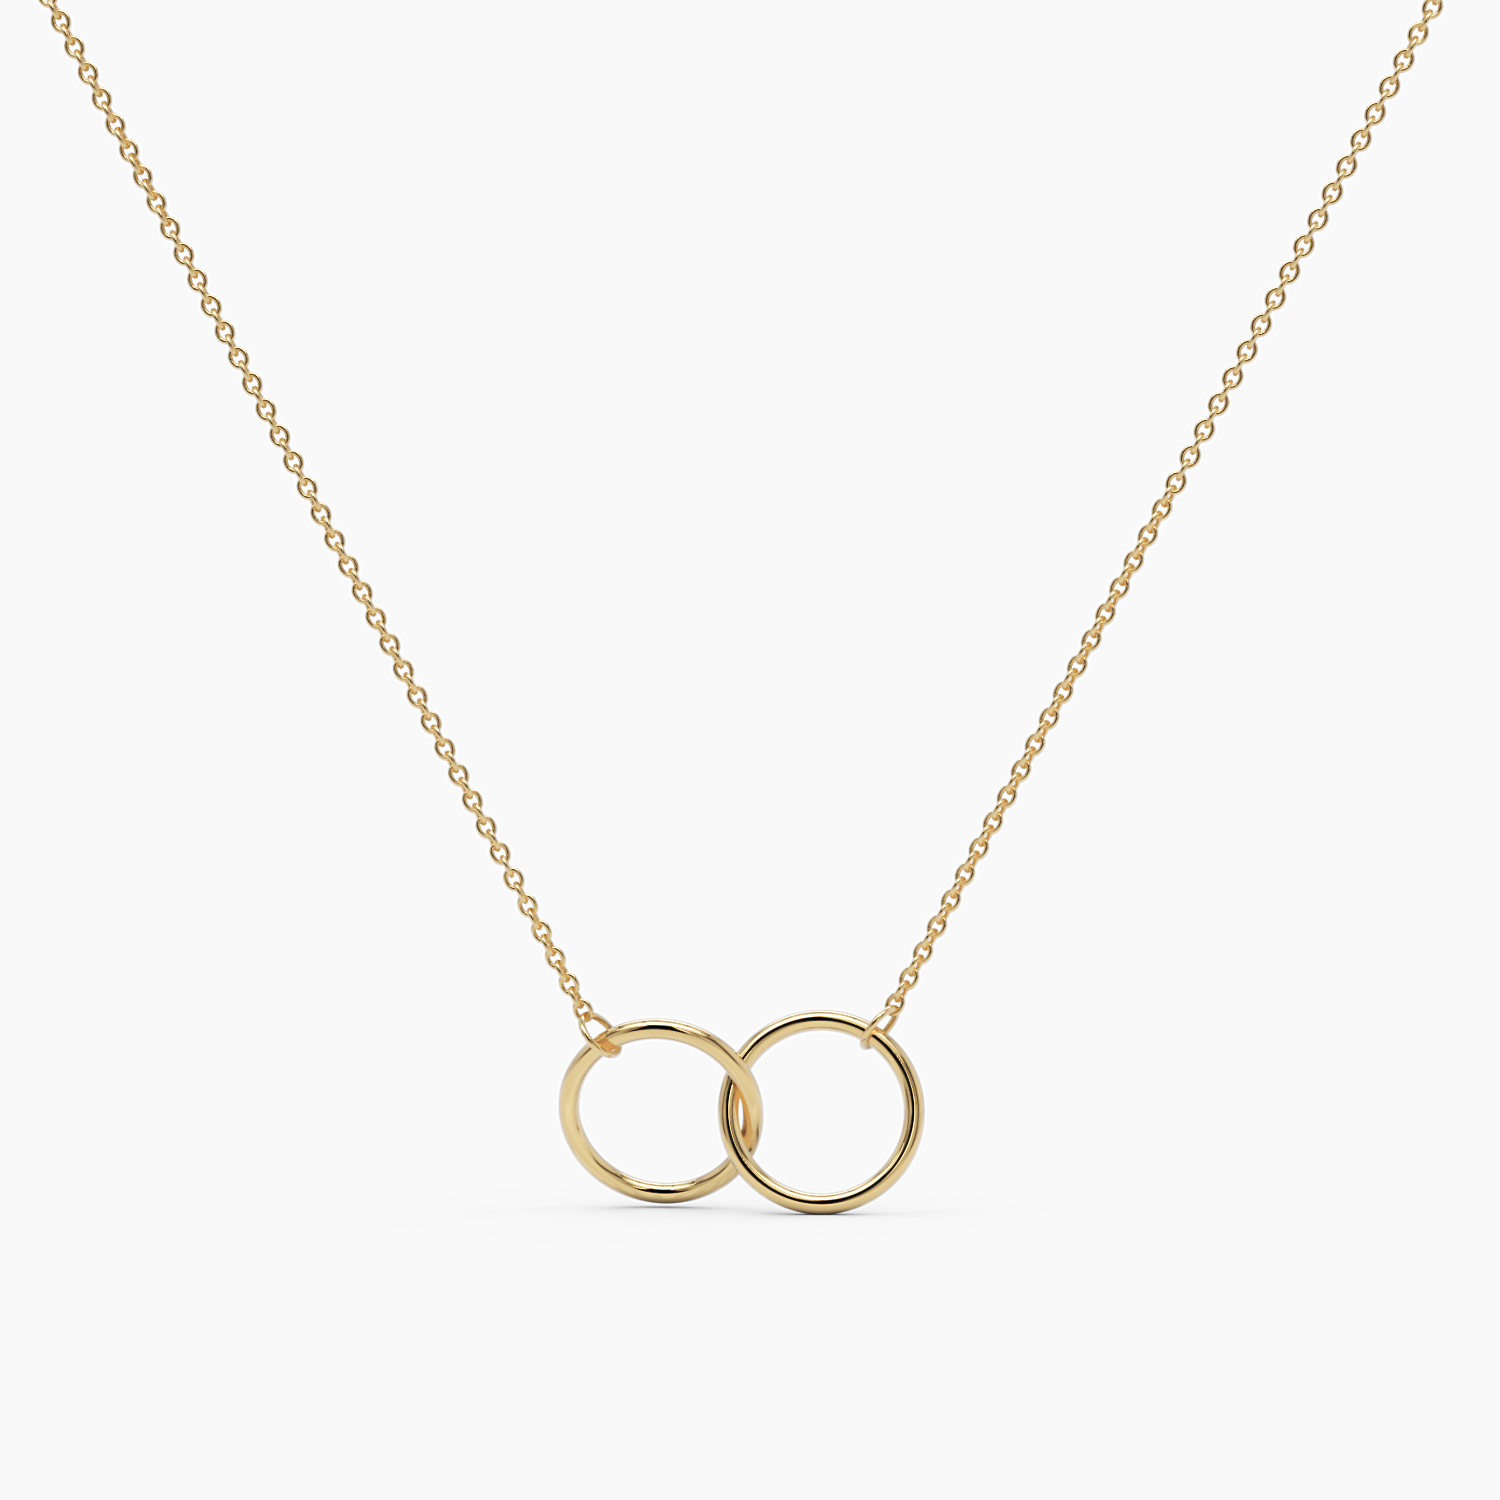 Interlinked Gold Circles Necklace